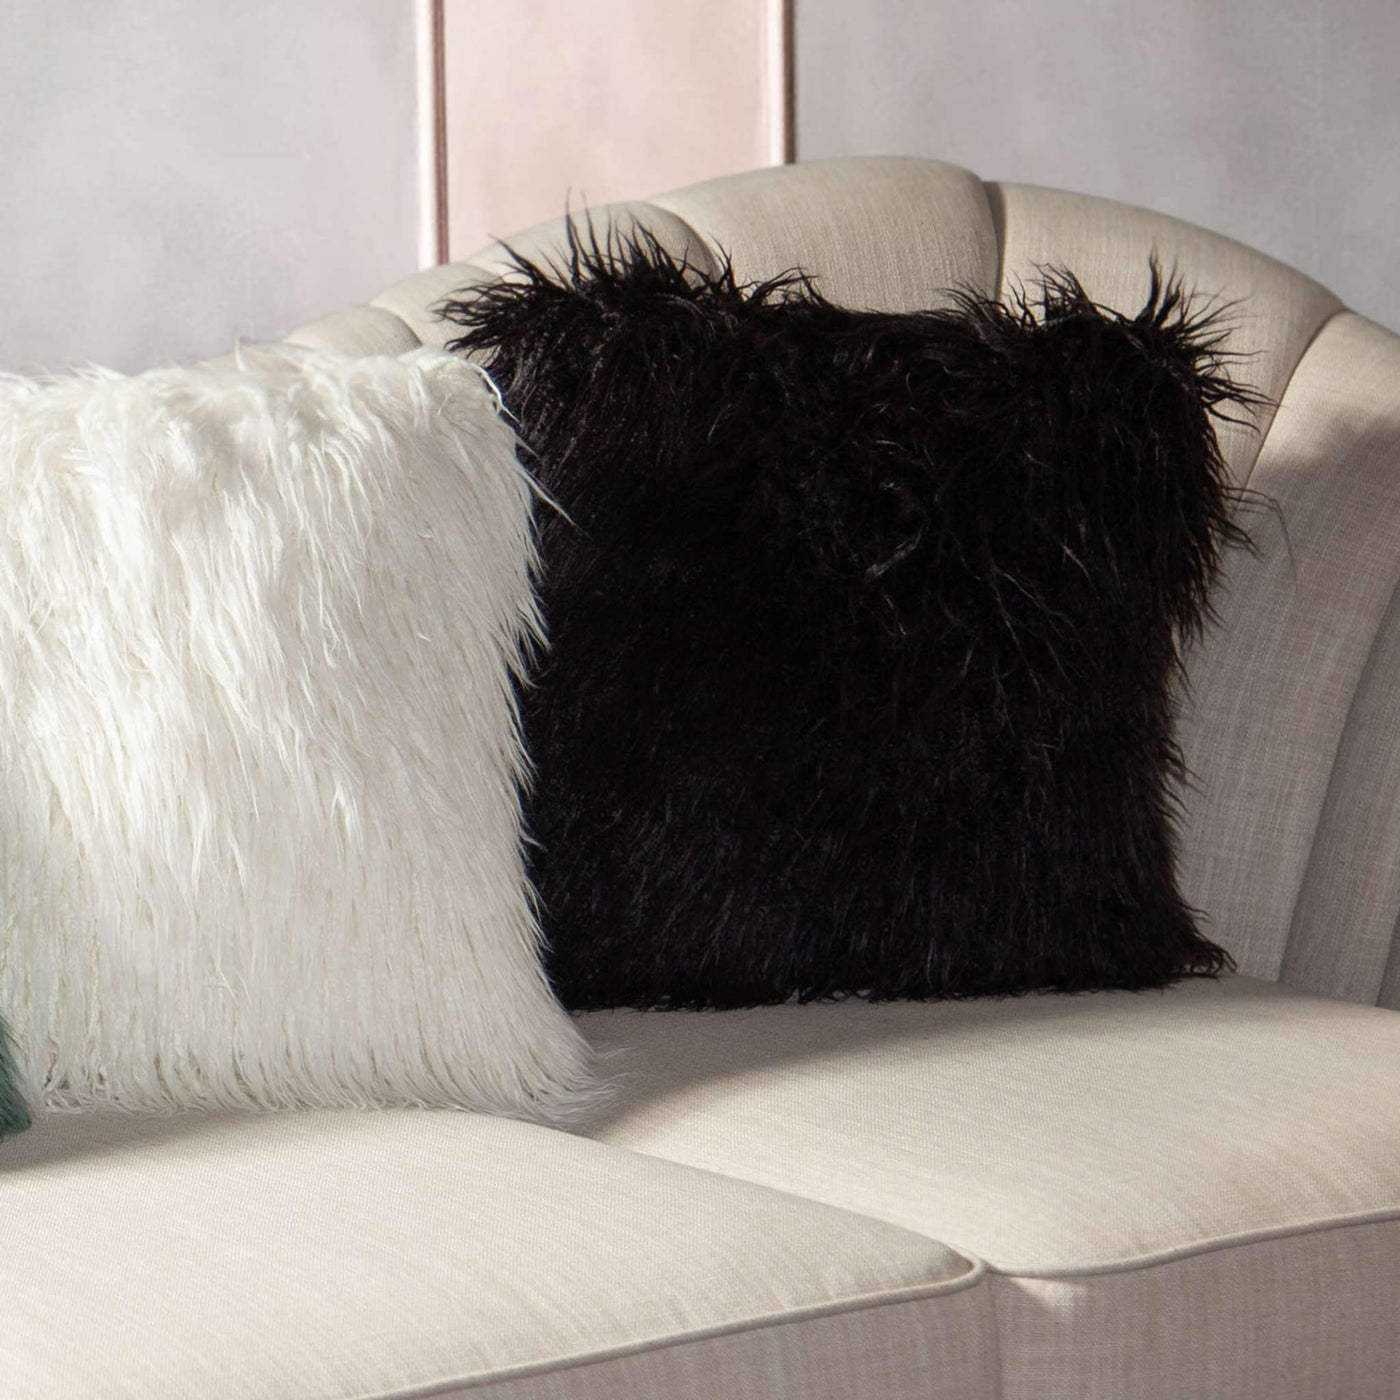 18" Square Accent Pillow by Diamond Sofa in White Dual-Sided Faux Fur